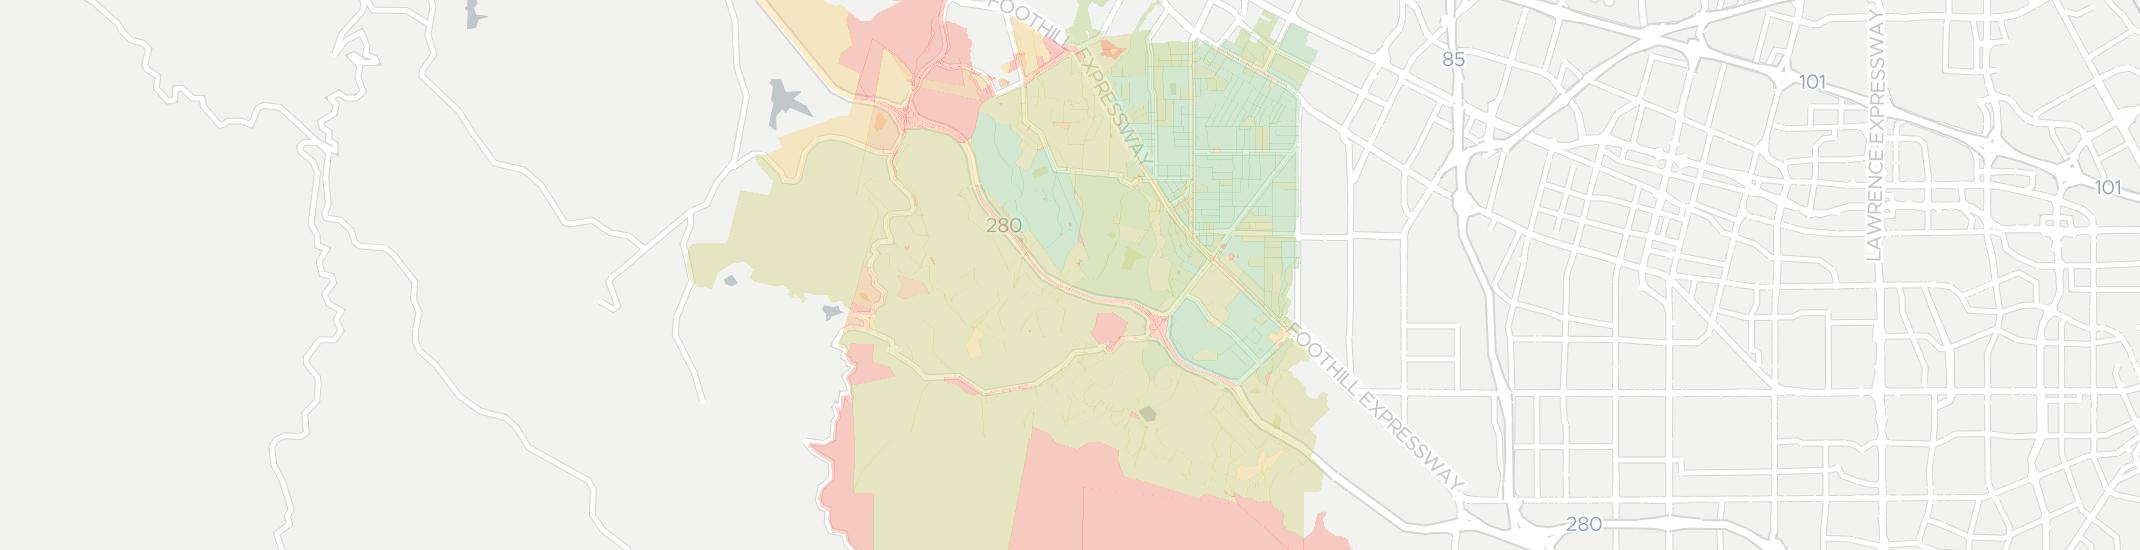 Los Altos Hills Internet Competition Map. Click for interactive map.